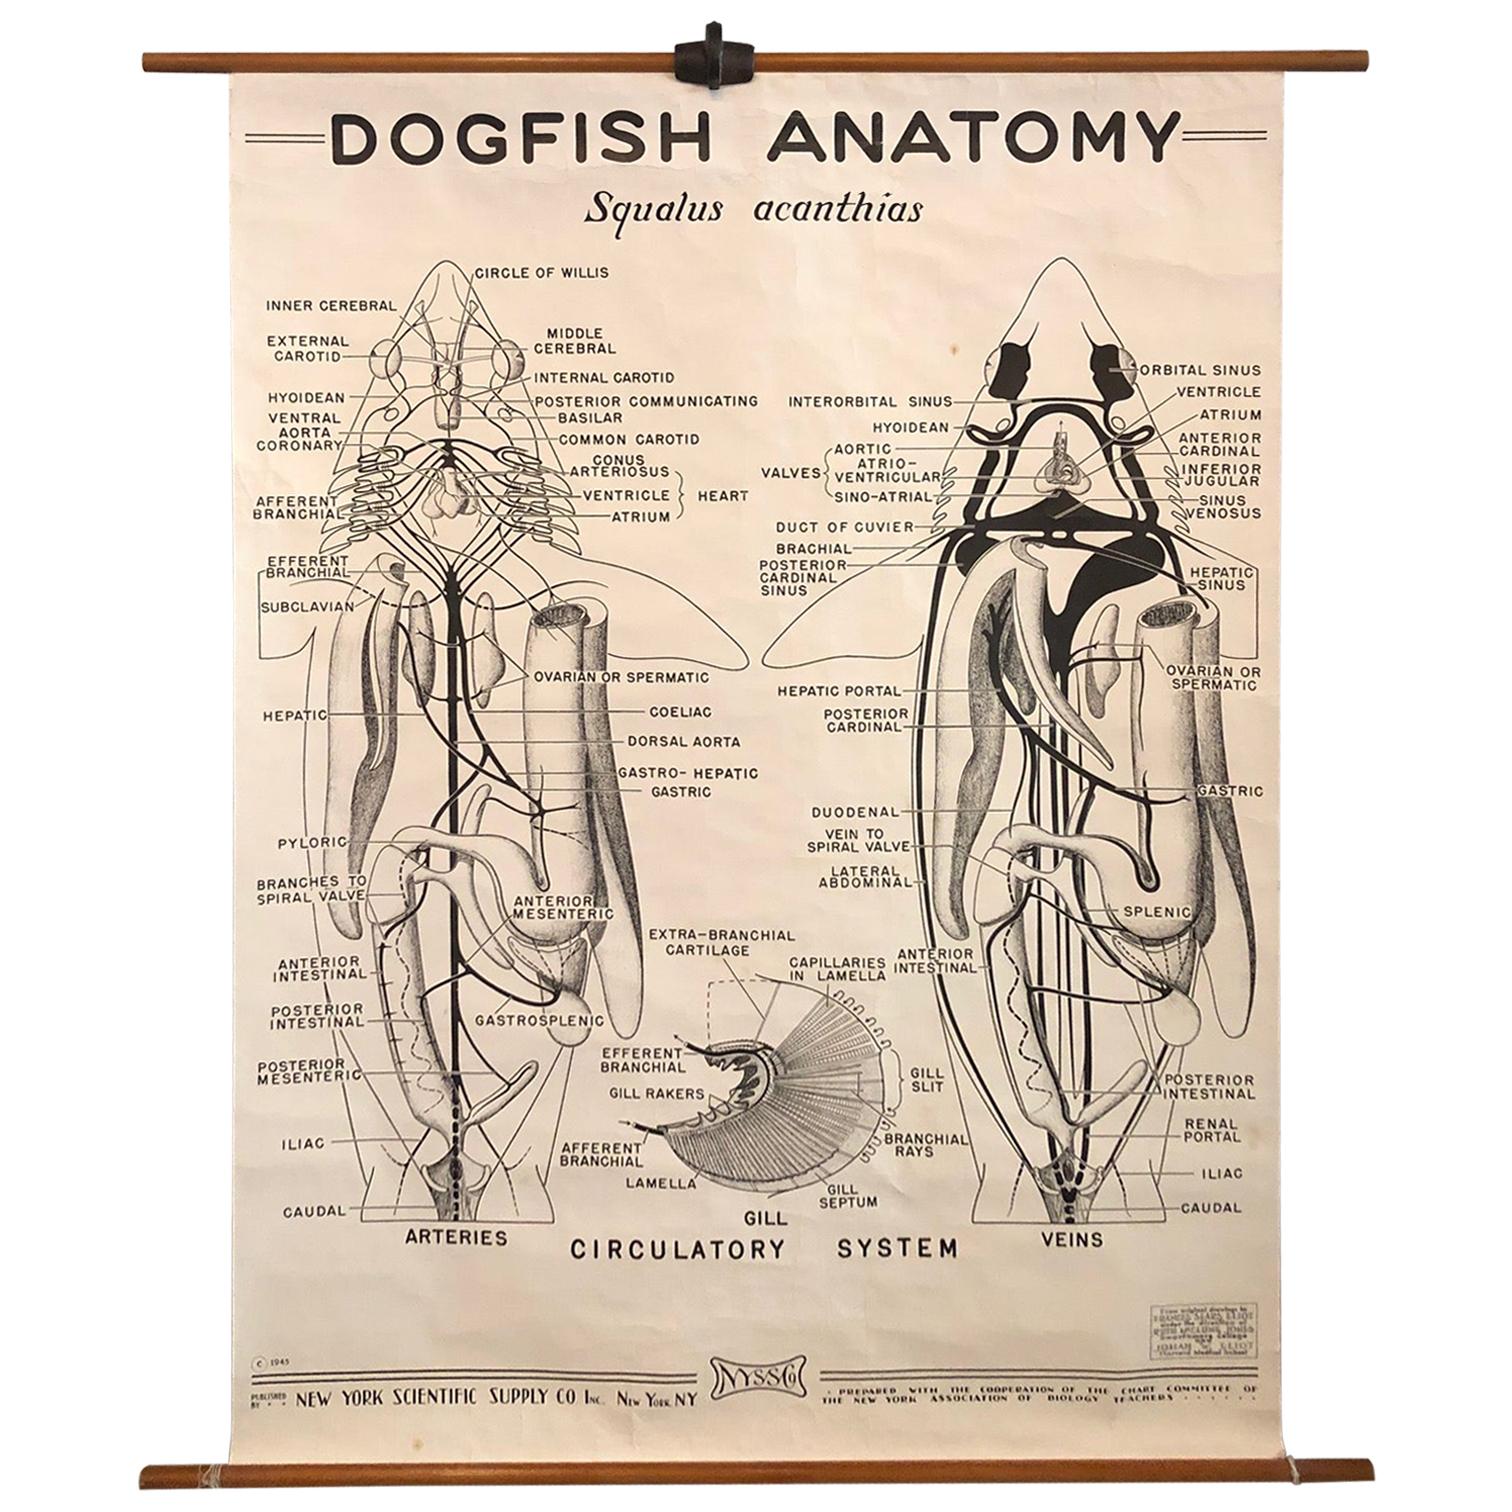 Educational Zoological Dogfish Anatomy Chart by New York Scientific Co.